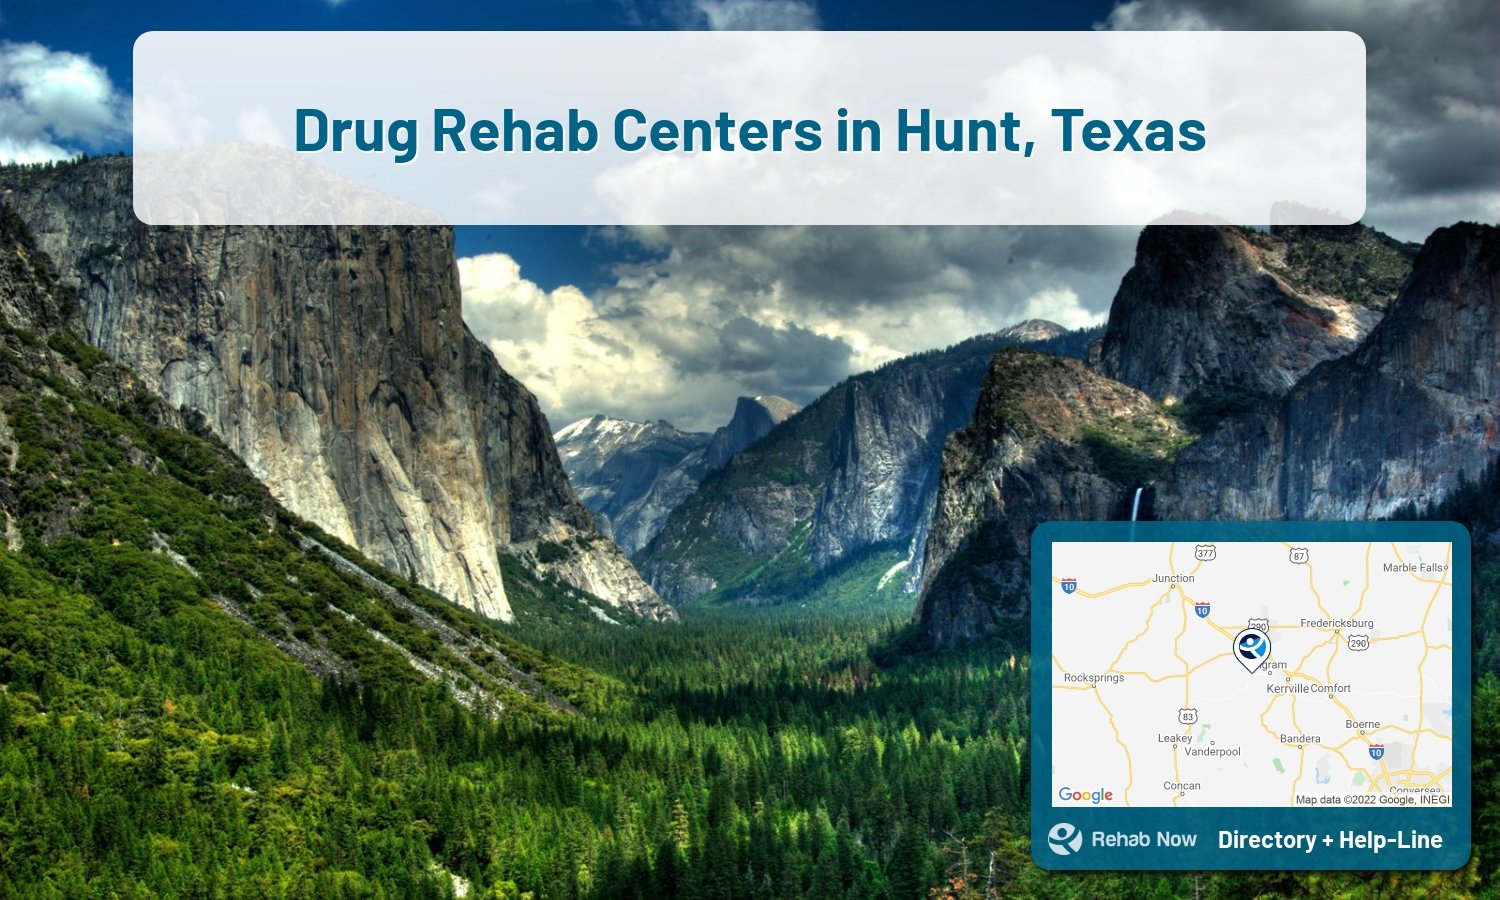 Let our expert counselors help find the best addiction treatment in Hunt, Texas now with a free call to our hotline.